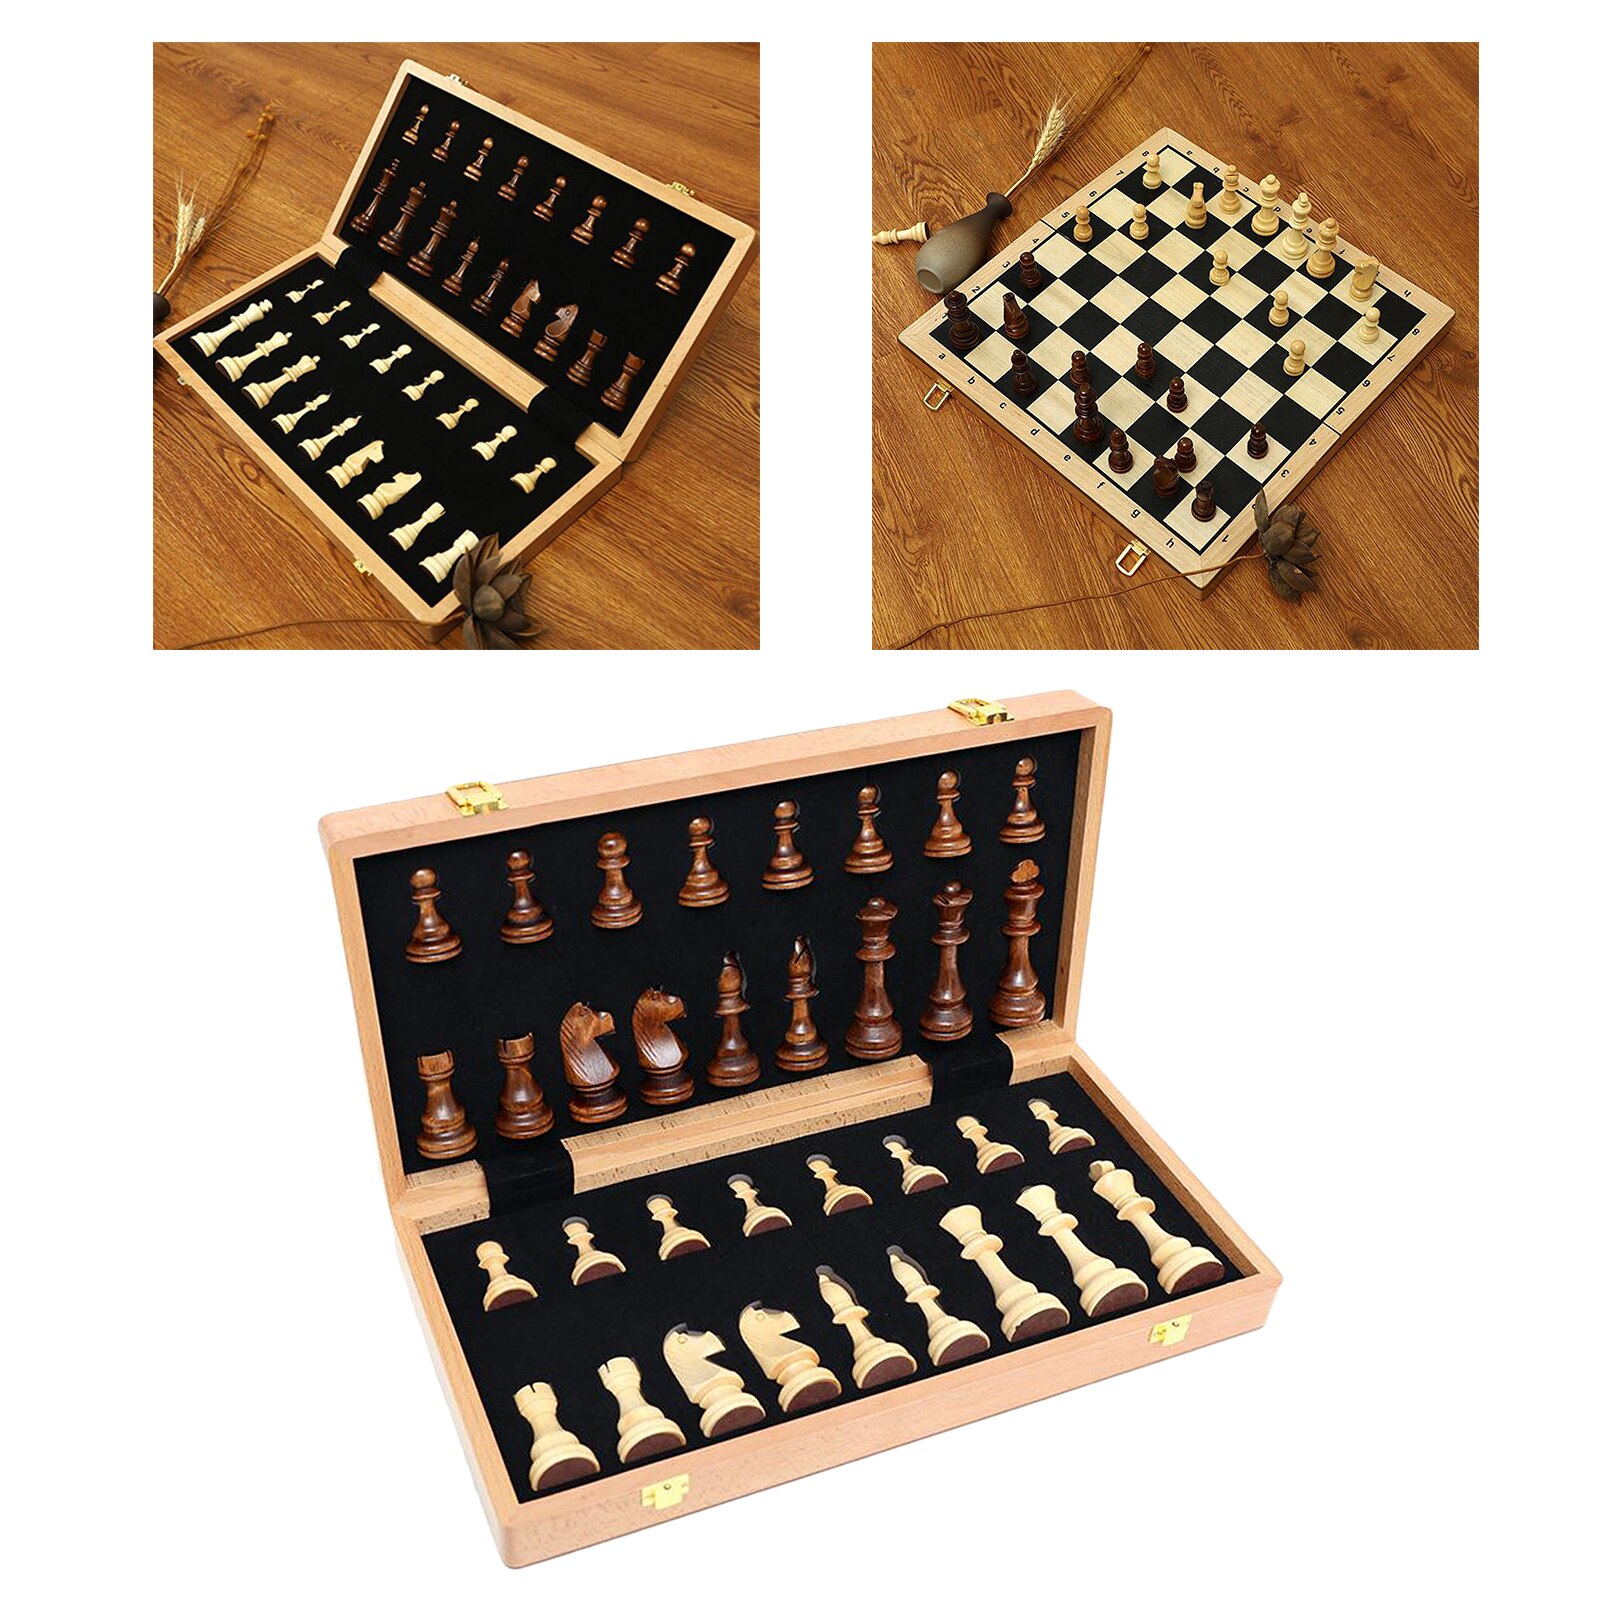 Chess Set Handmade Chess Pieces Foldable Chess Board,Storage Inside Chess Game for Kids Adult